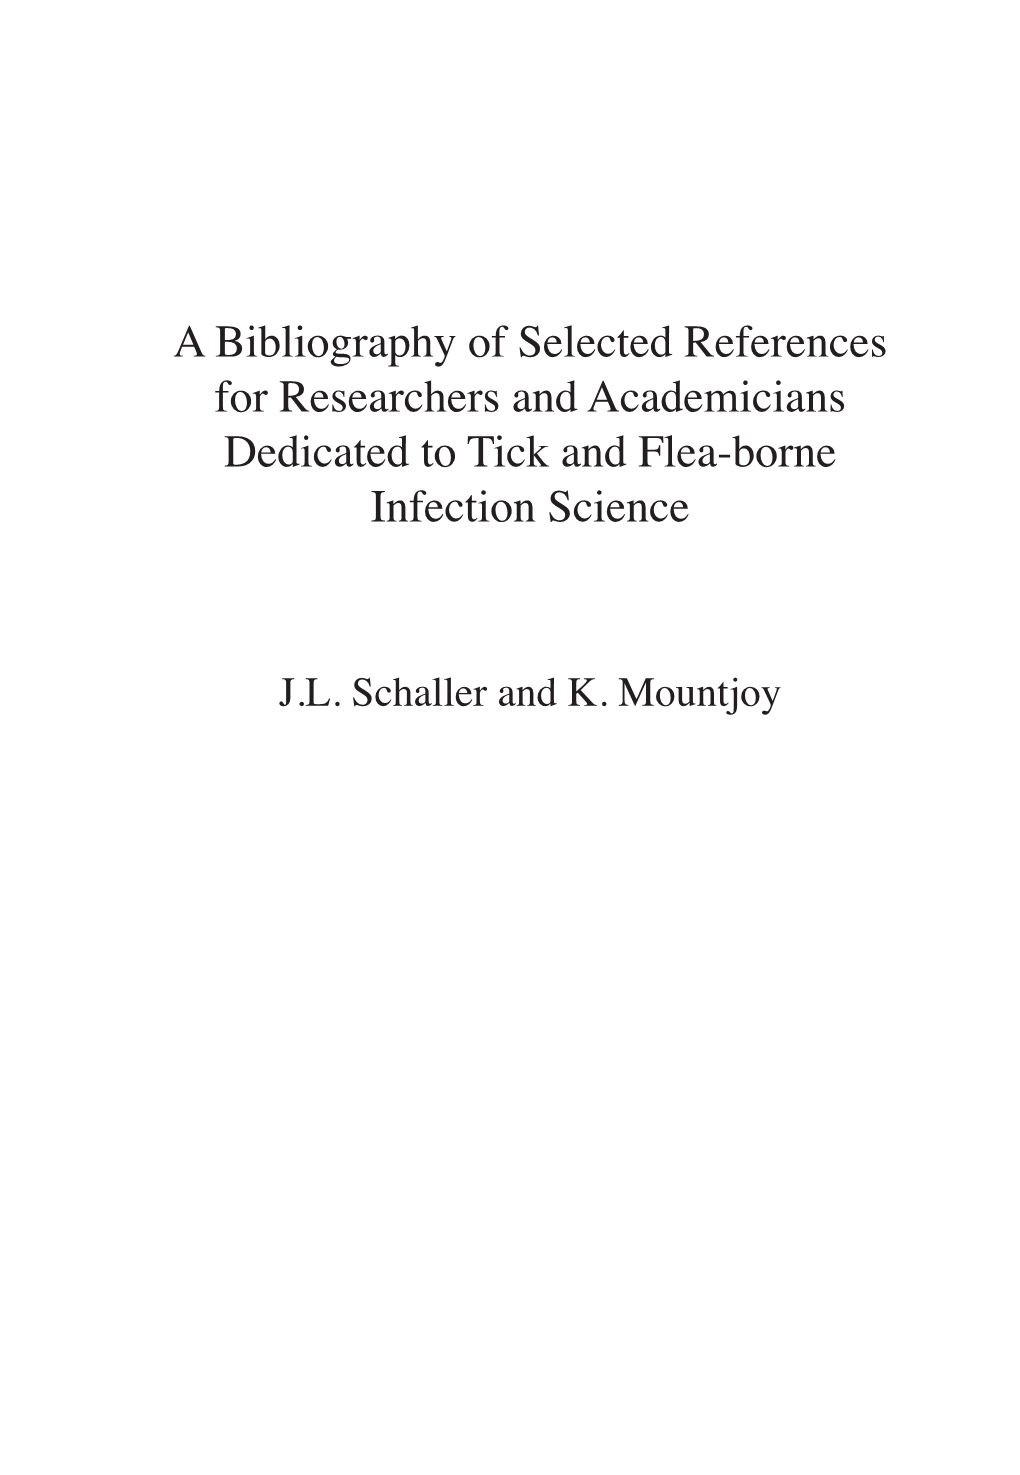 A Bibliography of Selected References for Researchers and Academicians Dedicated to Tick and Flea-Borne Infection Science